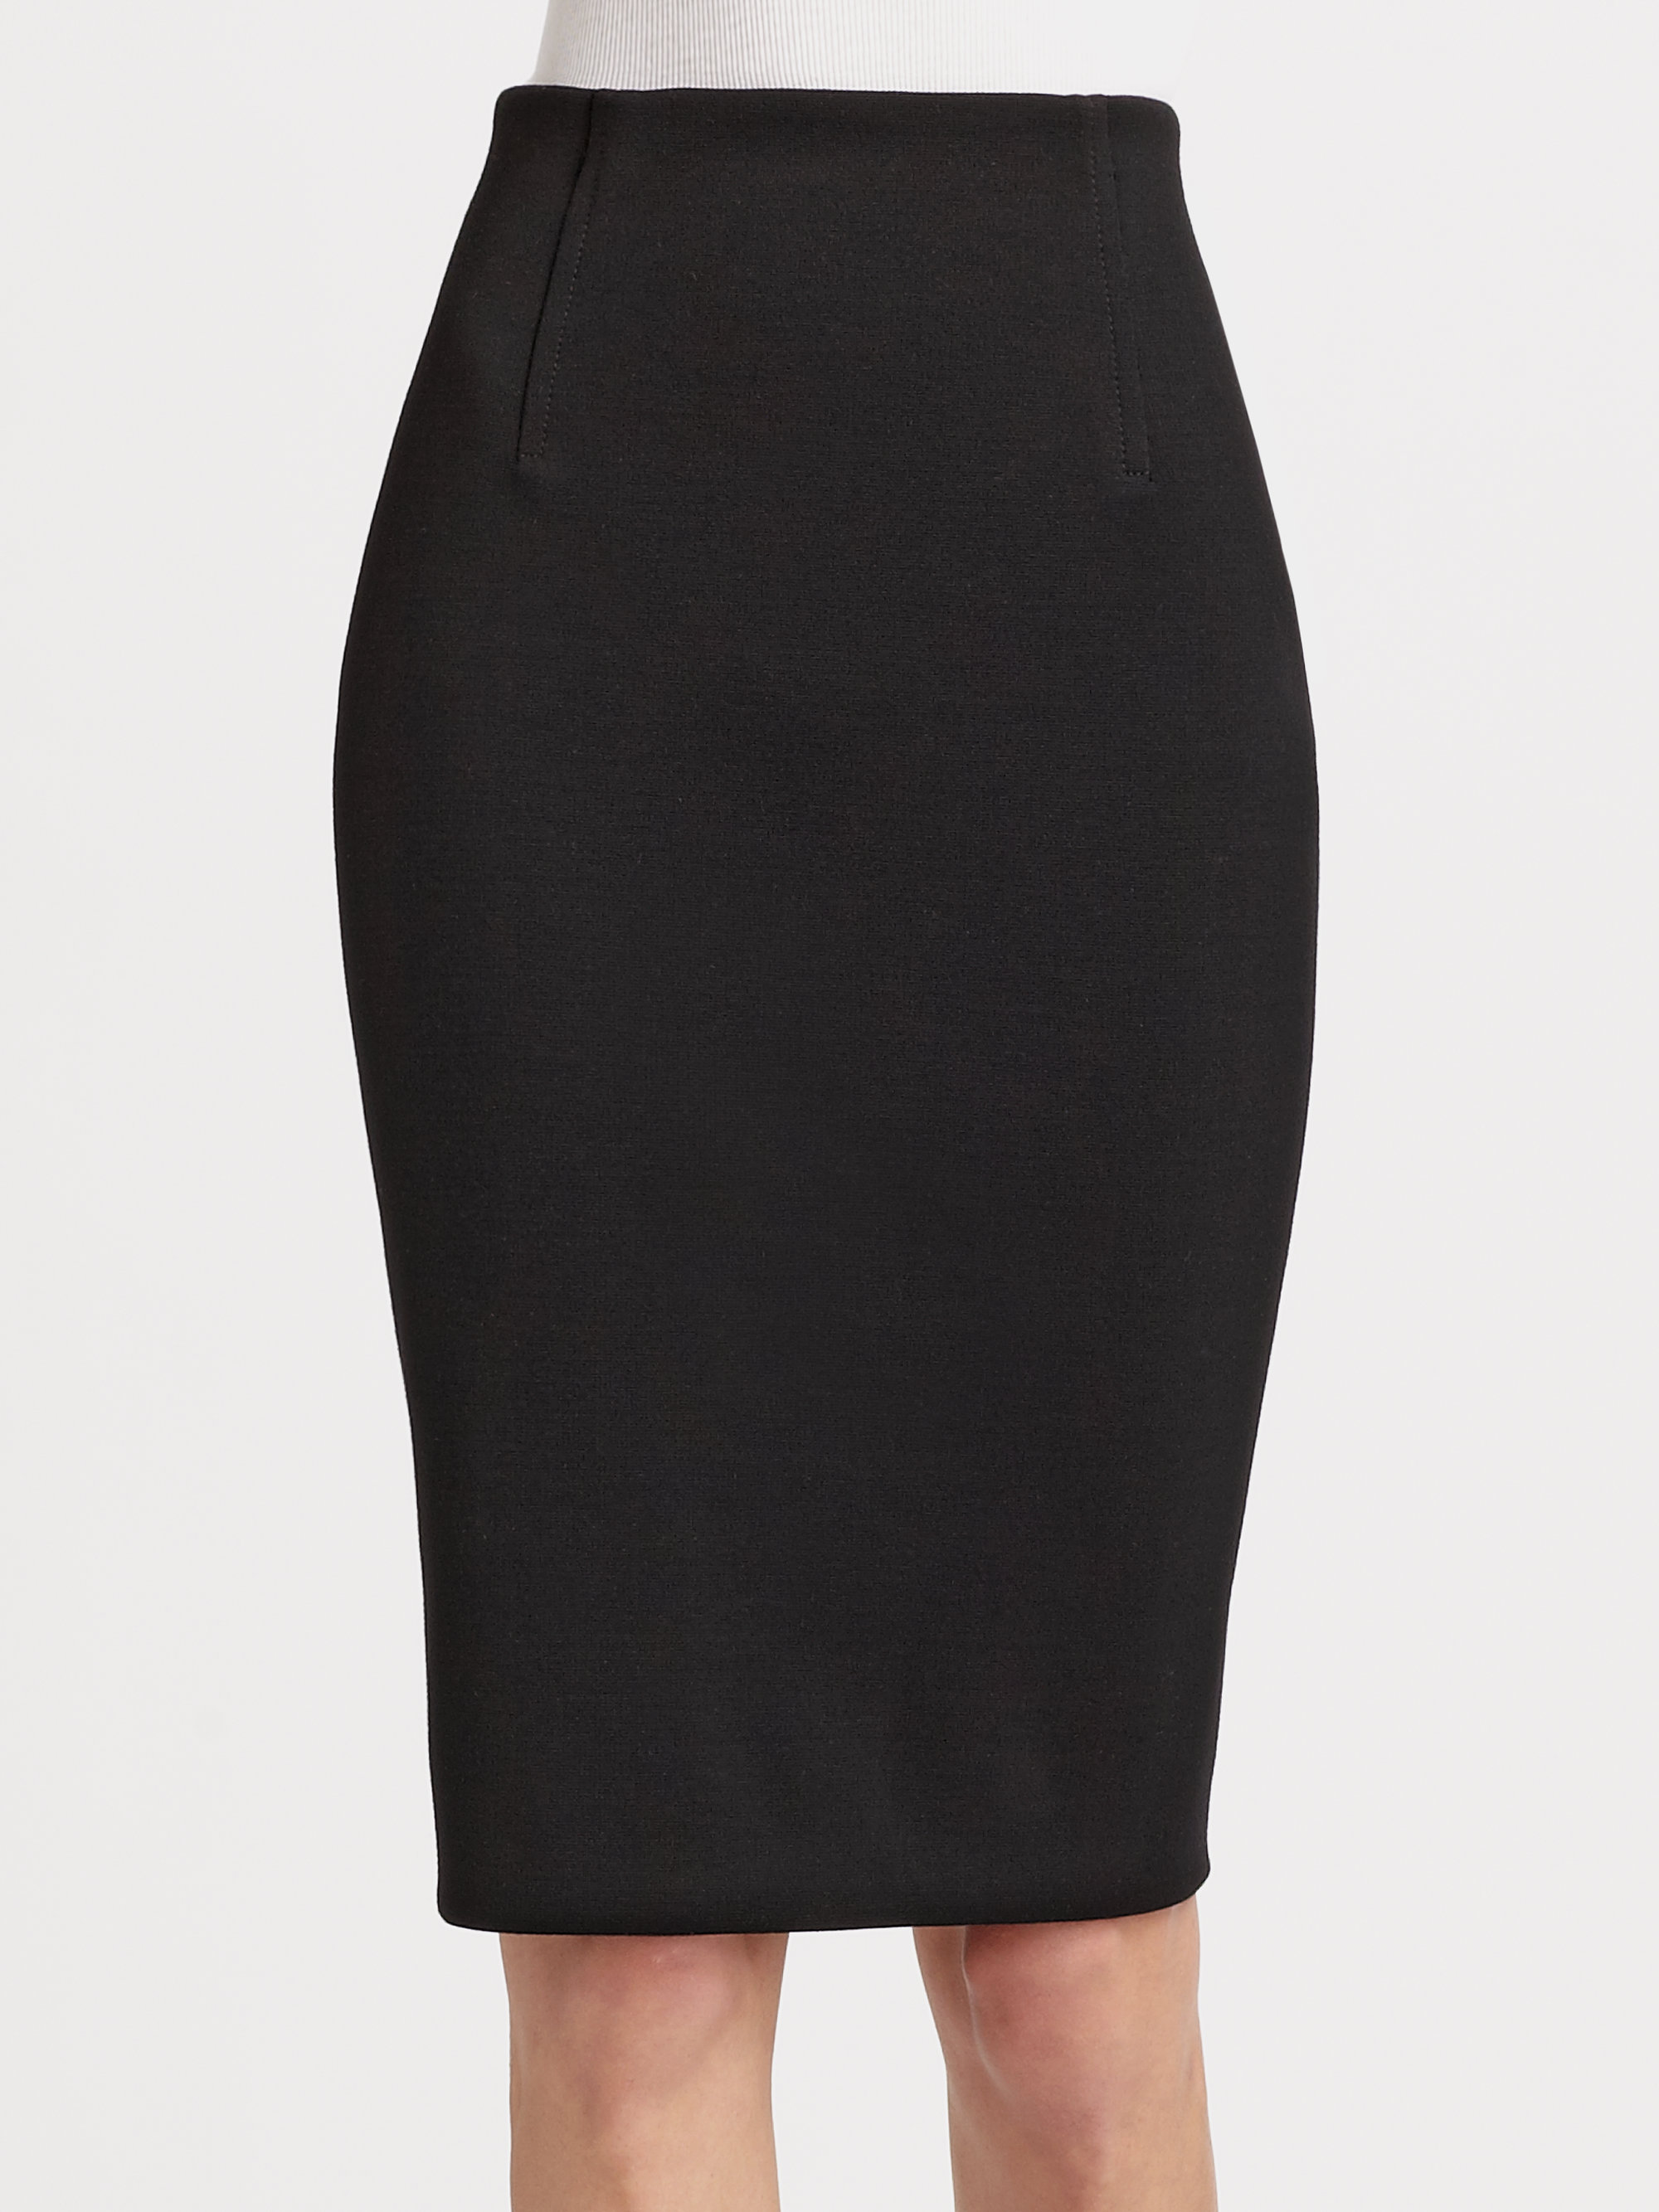 Lyst - Marc jacobs Double Knit Pencil Skirt in Black